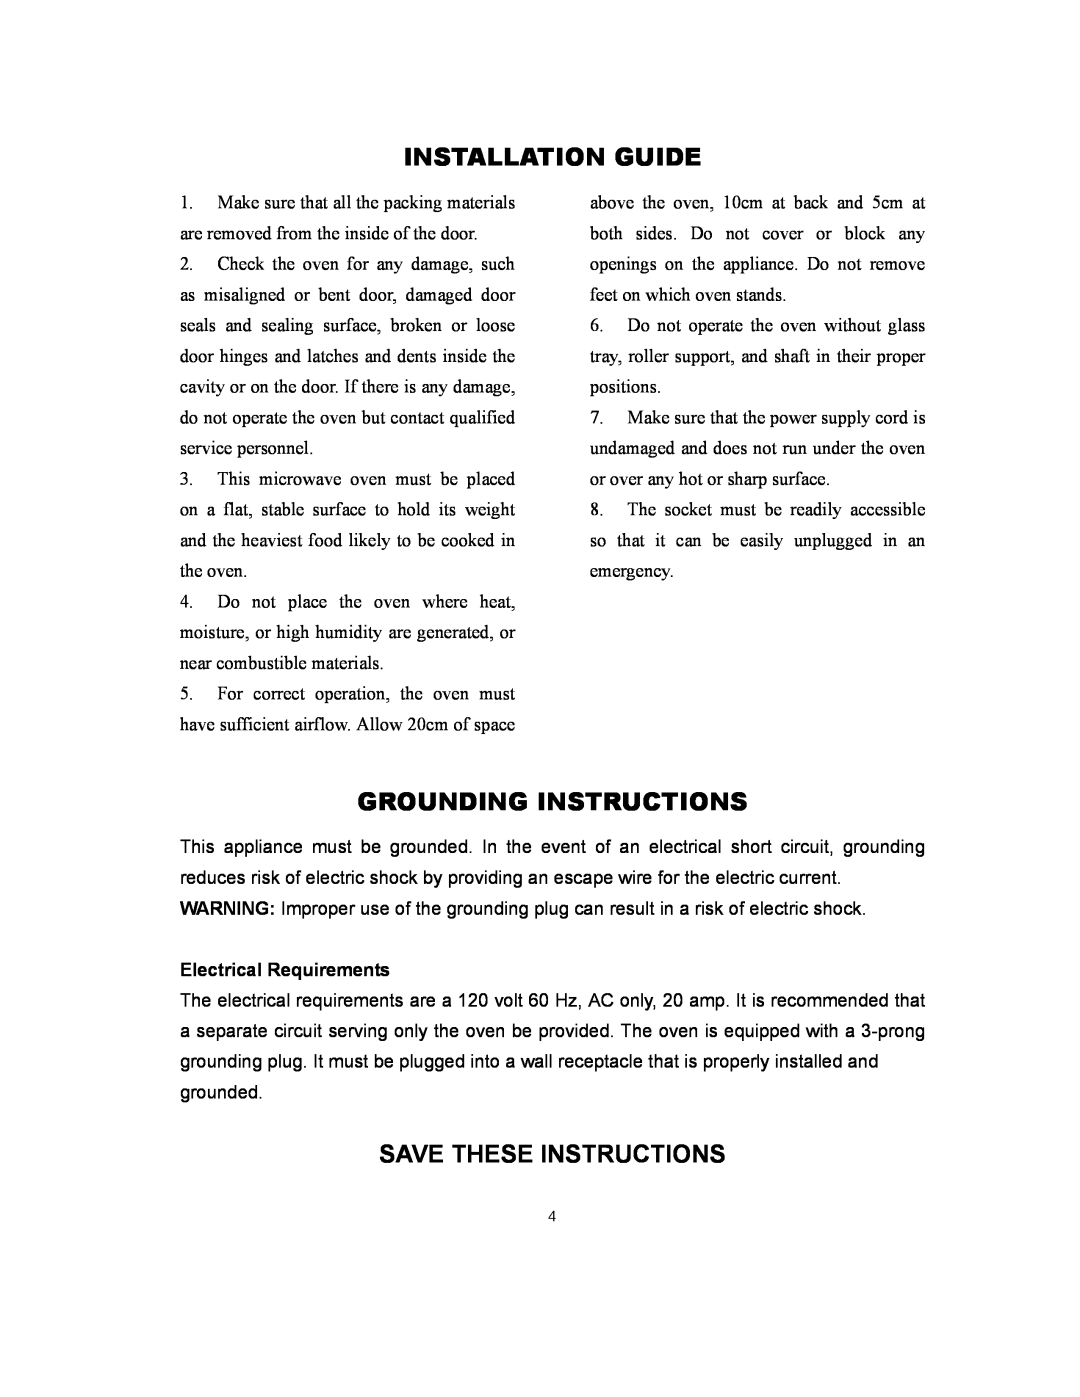 RCA RMW1171 owner manual Installation Guide, Grounding Instructions, Save These Instructions, Electrical Requirements 